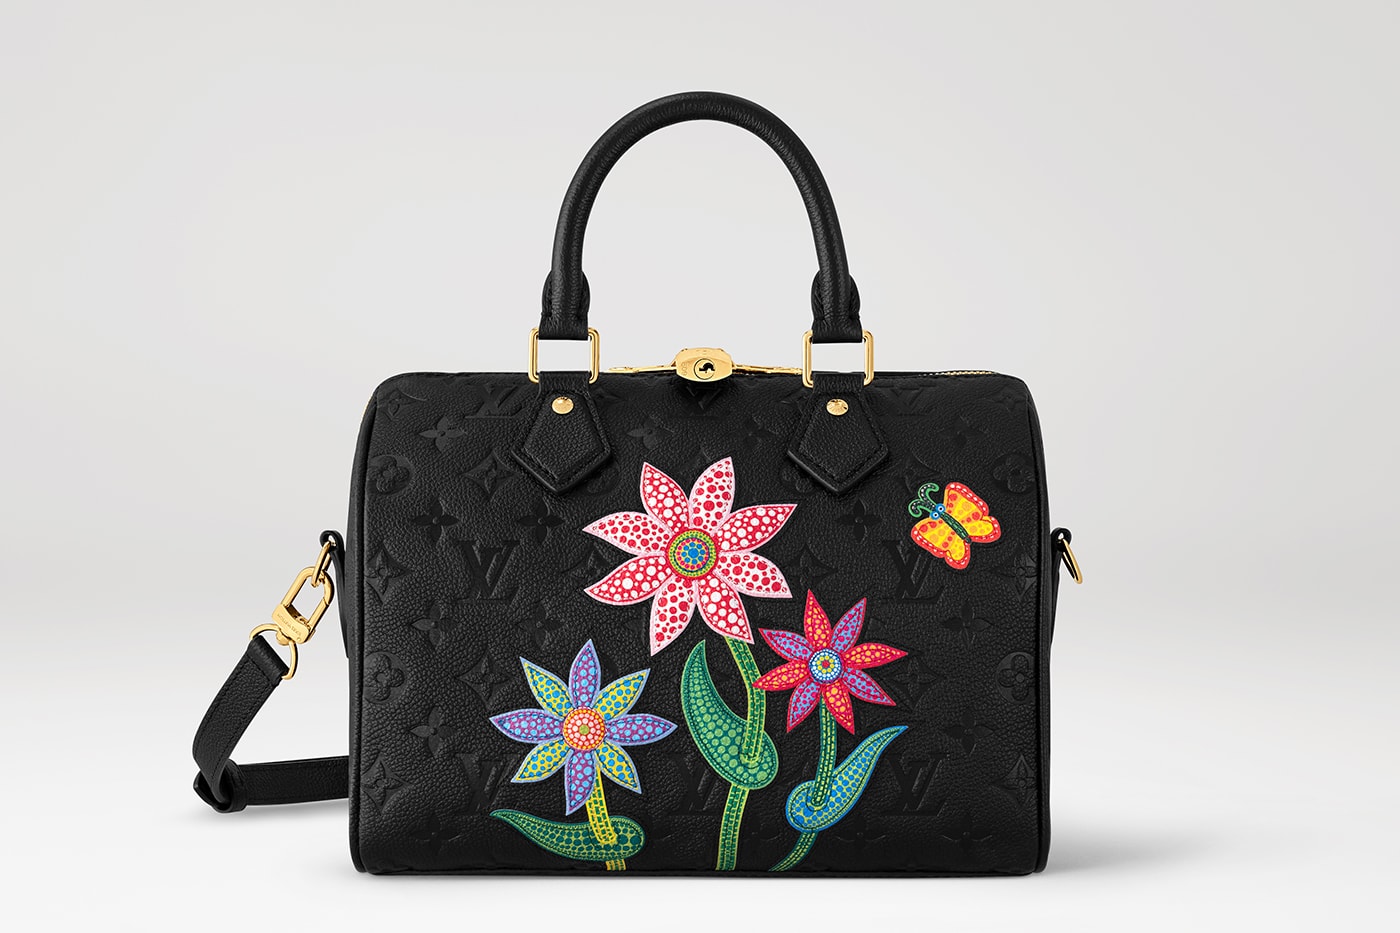 Louis Vuitton to Release Second Collaboration With Japanese Artist Yayoi  Kusama